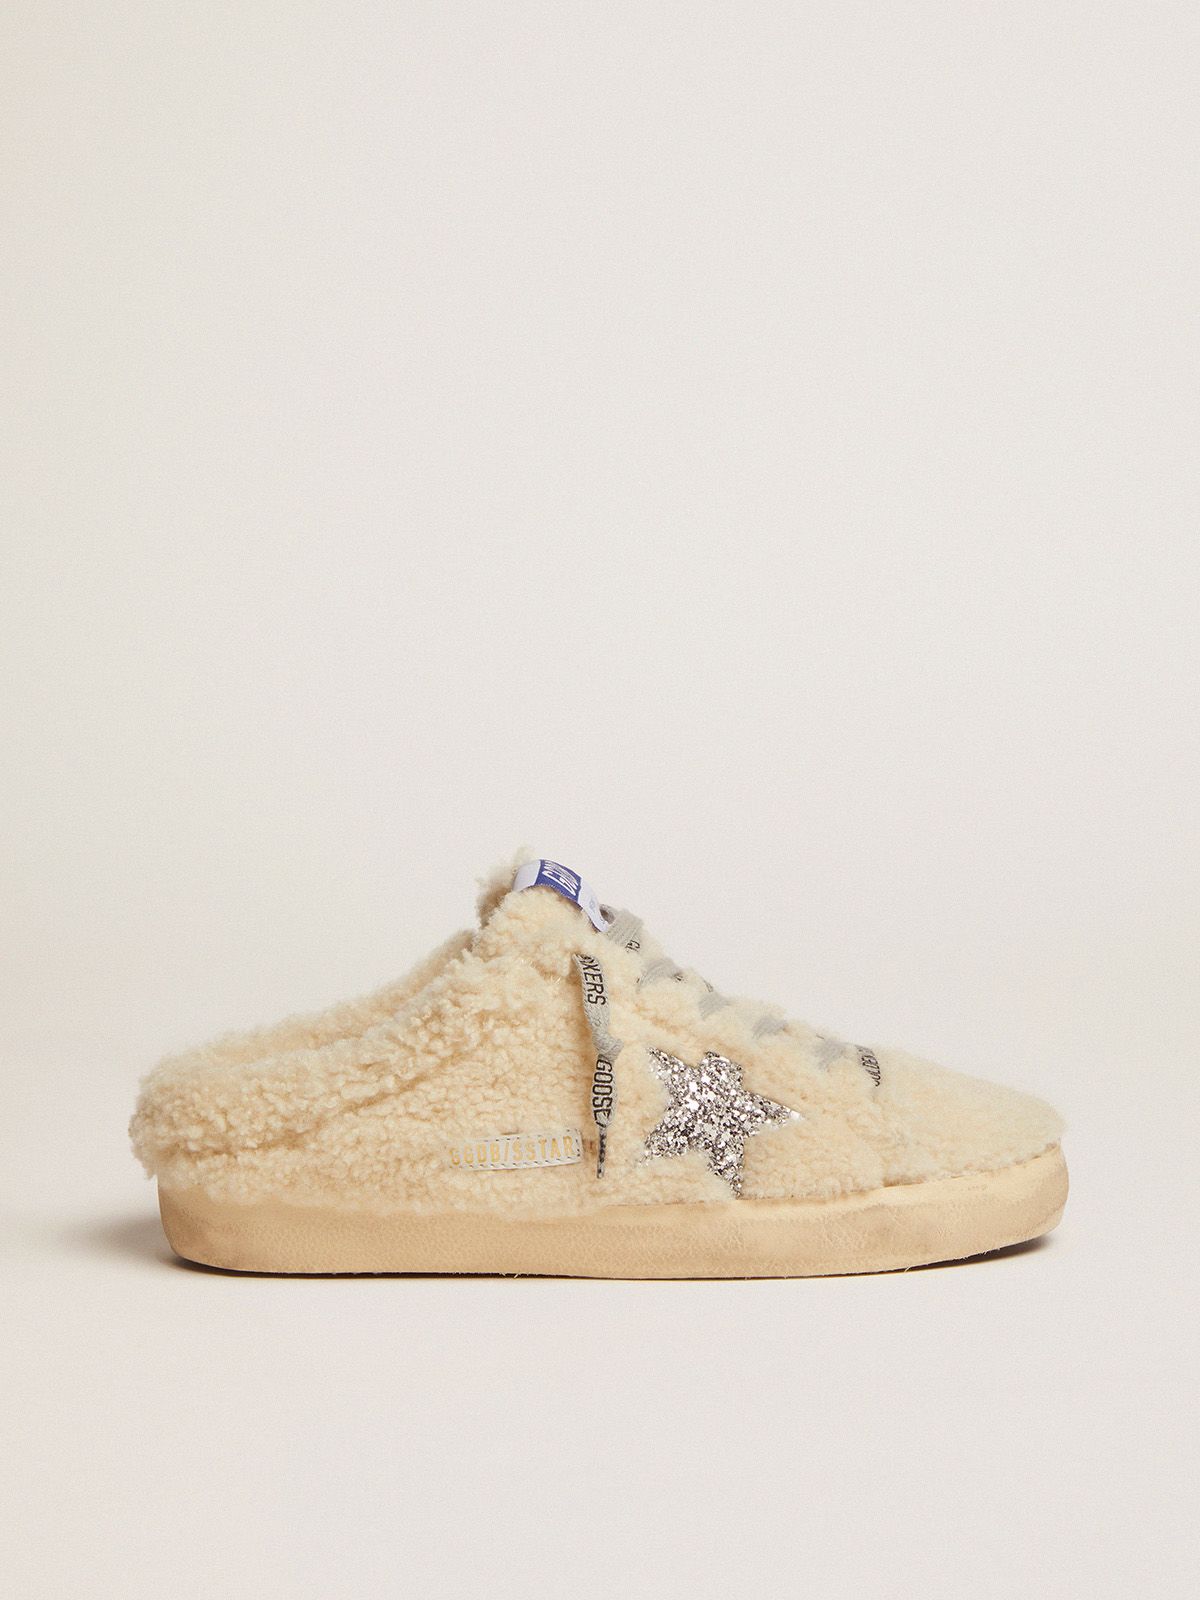 Sneakers Uomo Golden Goose Super-Star Sabots in natural white shearling with silver glitter star